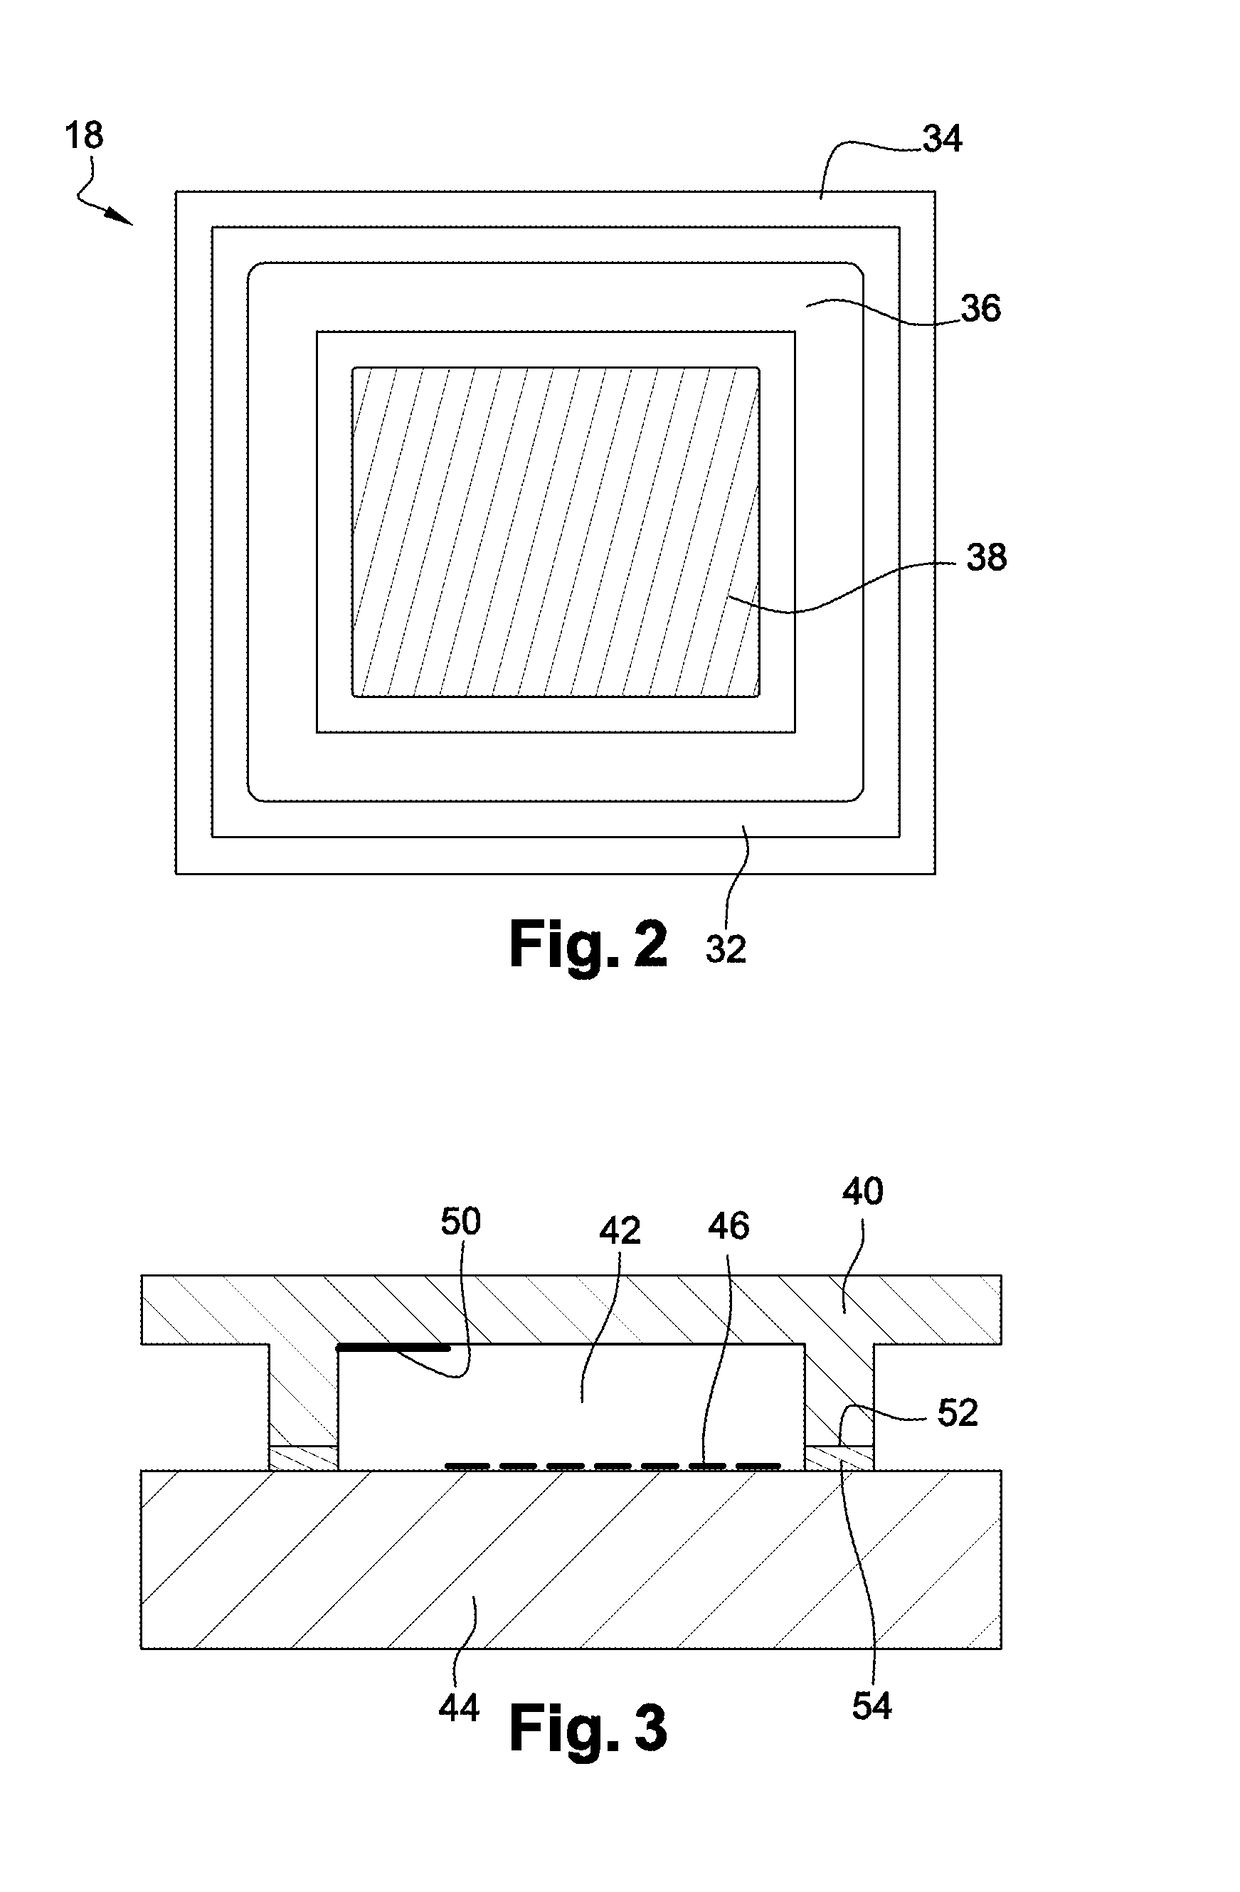 Method for Manufacturing a Device Comprising a Hermetically Sealed Vacuum Housing and Getter